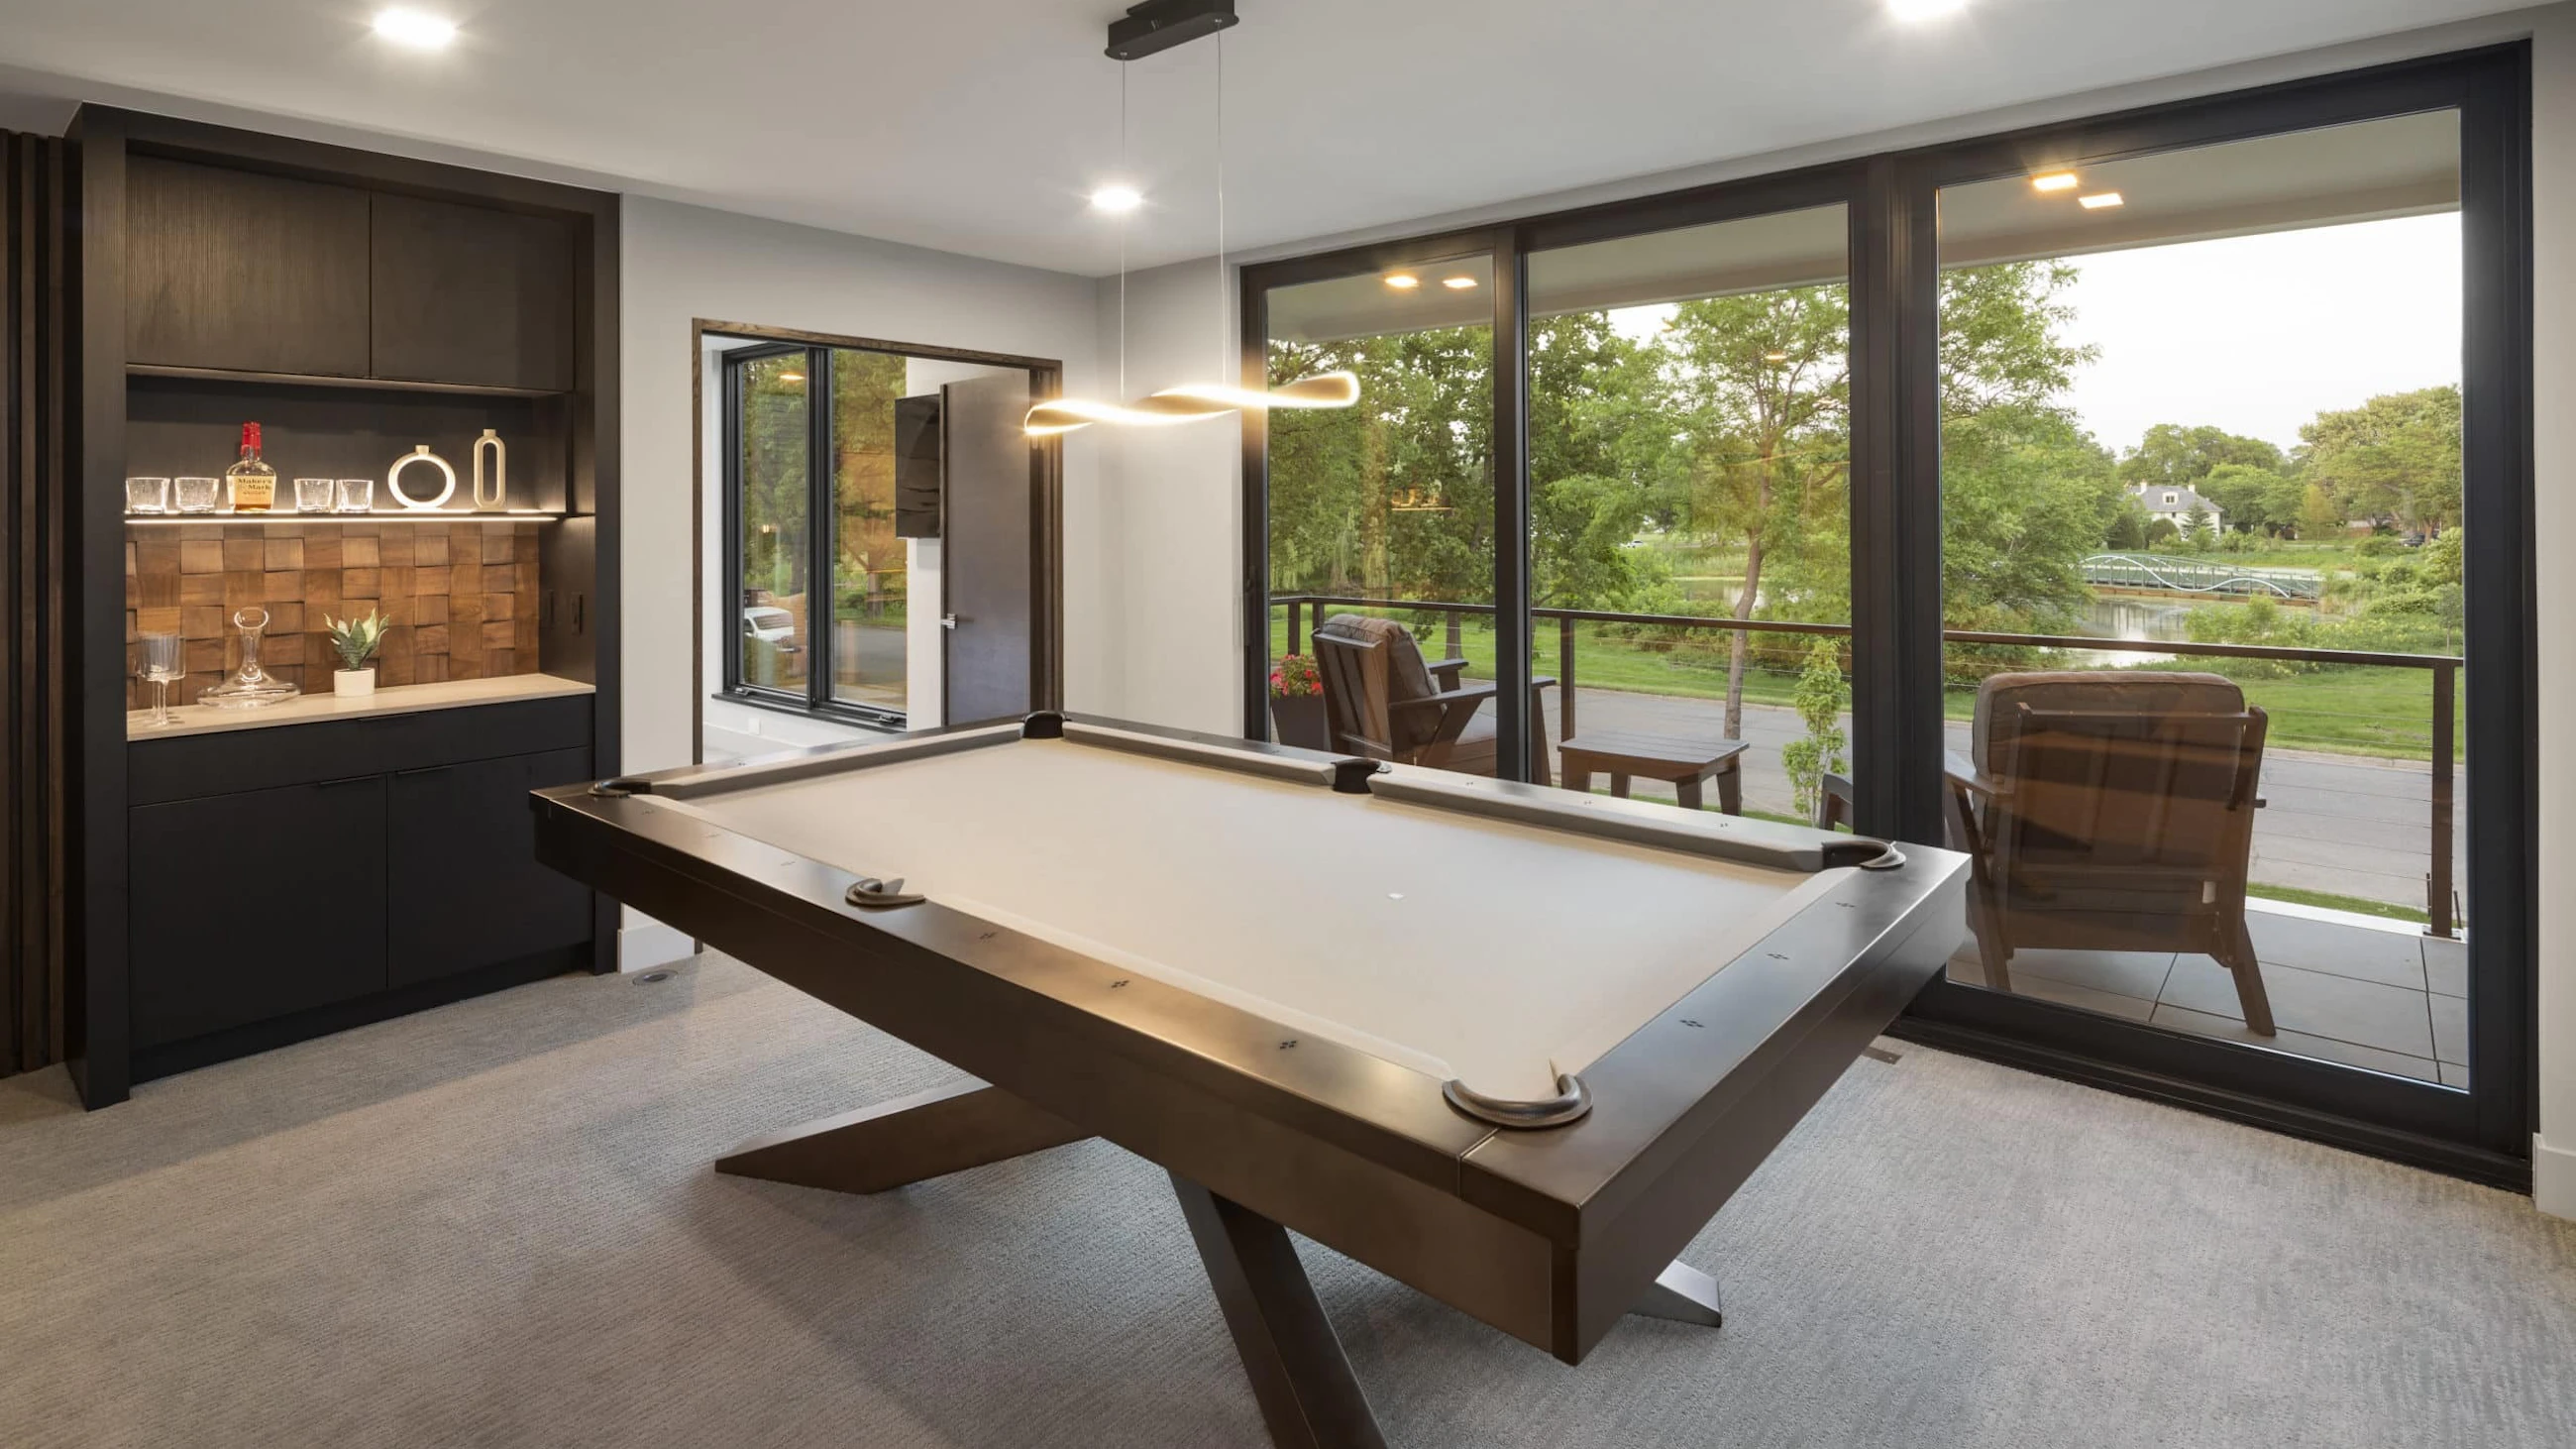 Second level with a snack bar and pool table